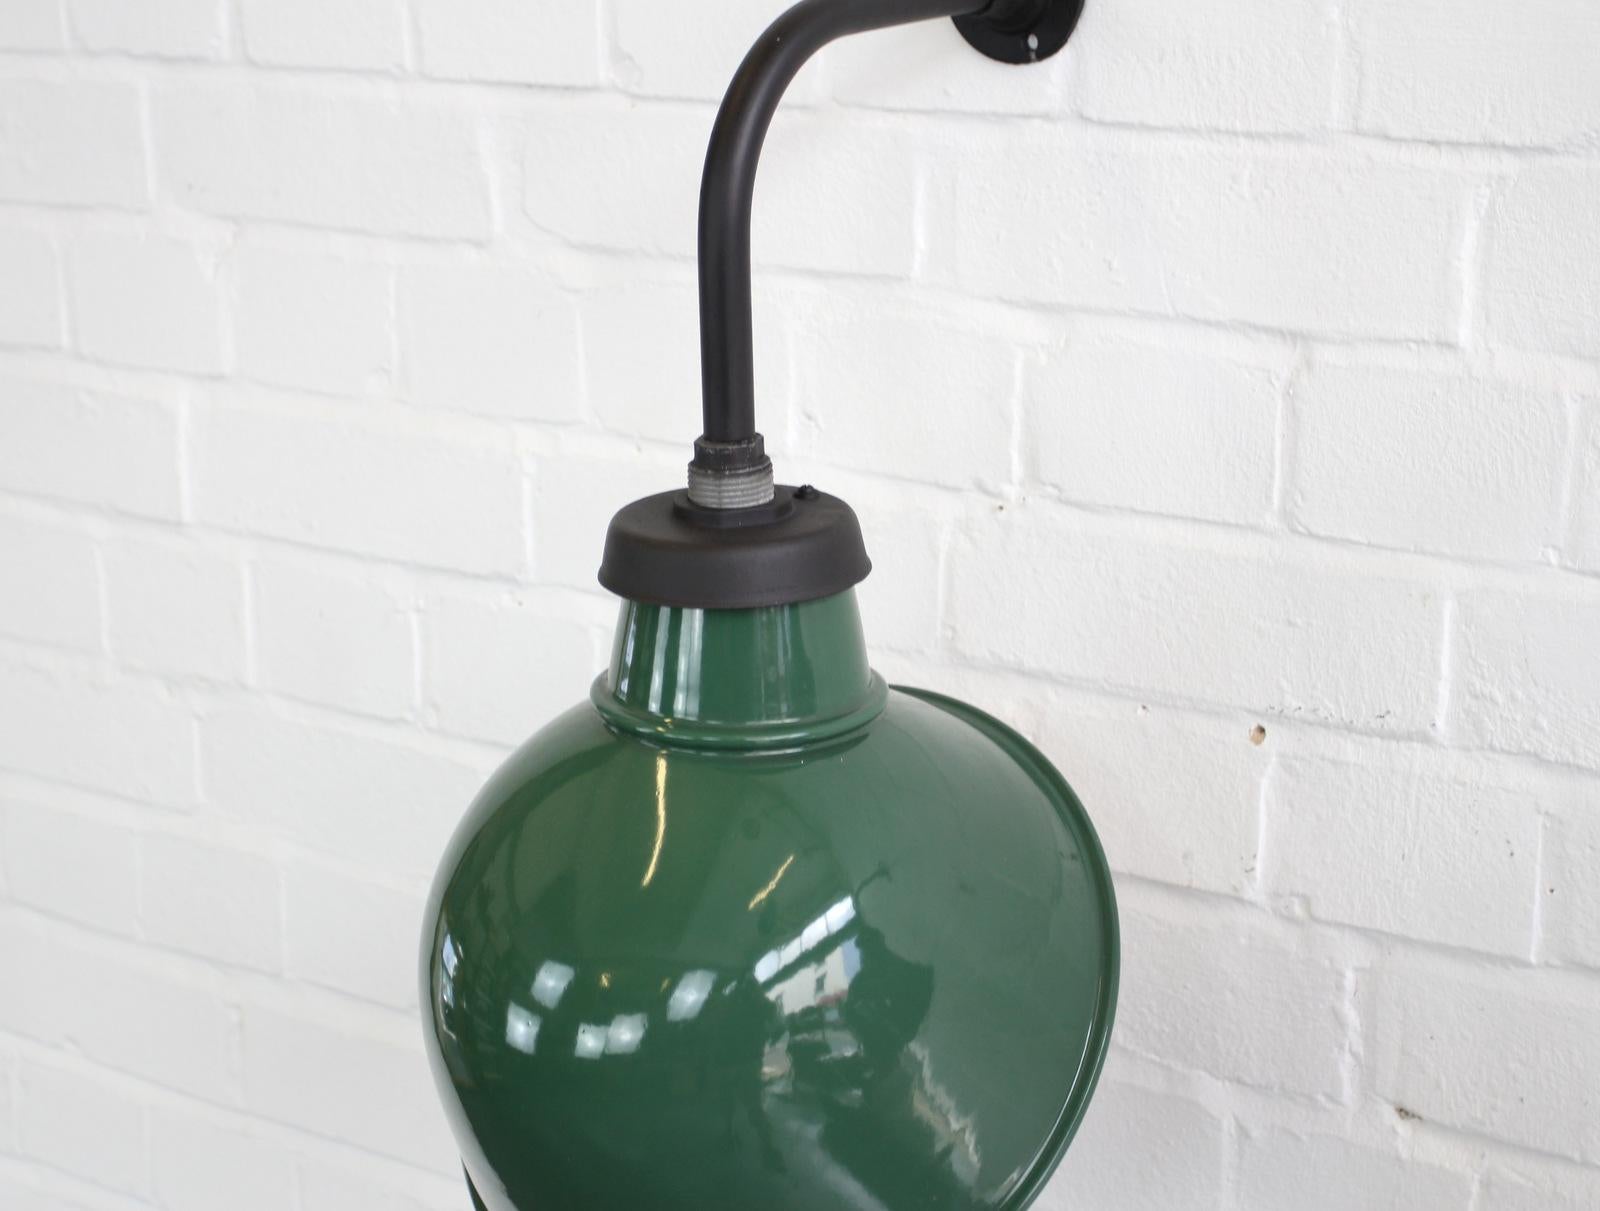 English Wall-Mounted Industrial Lamps by Crossland, circa 1950s